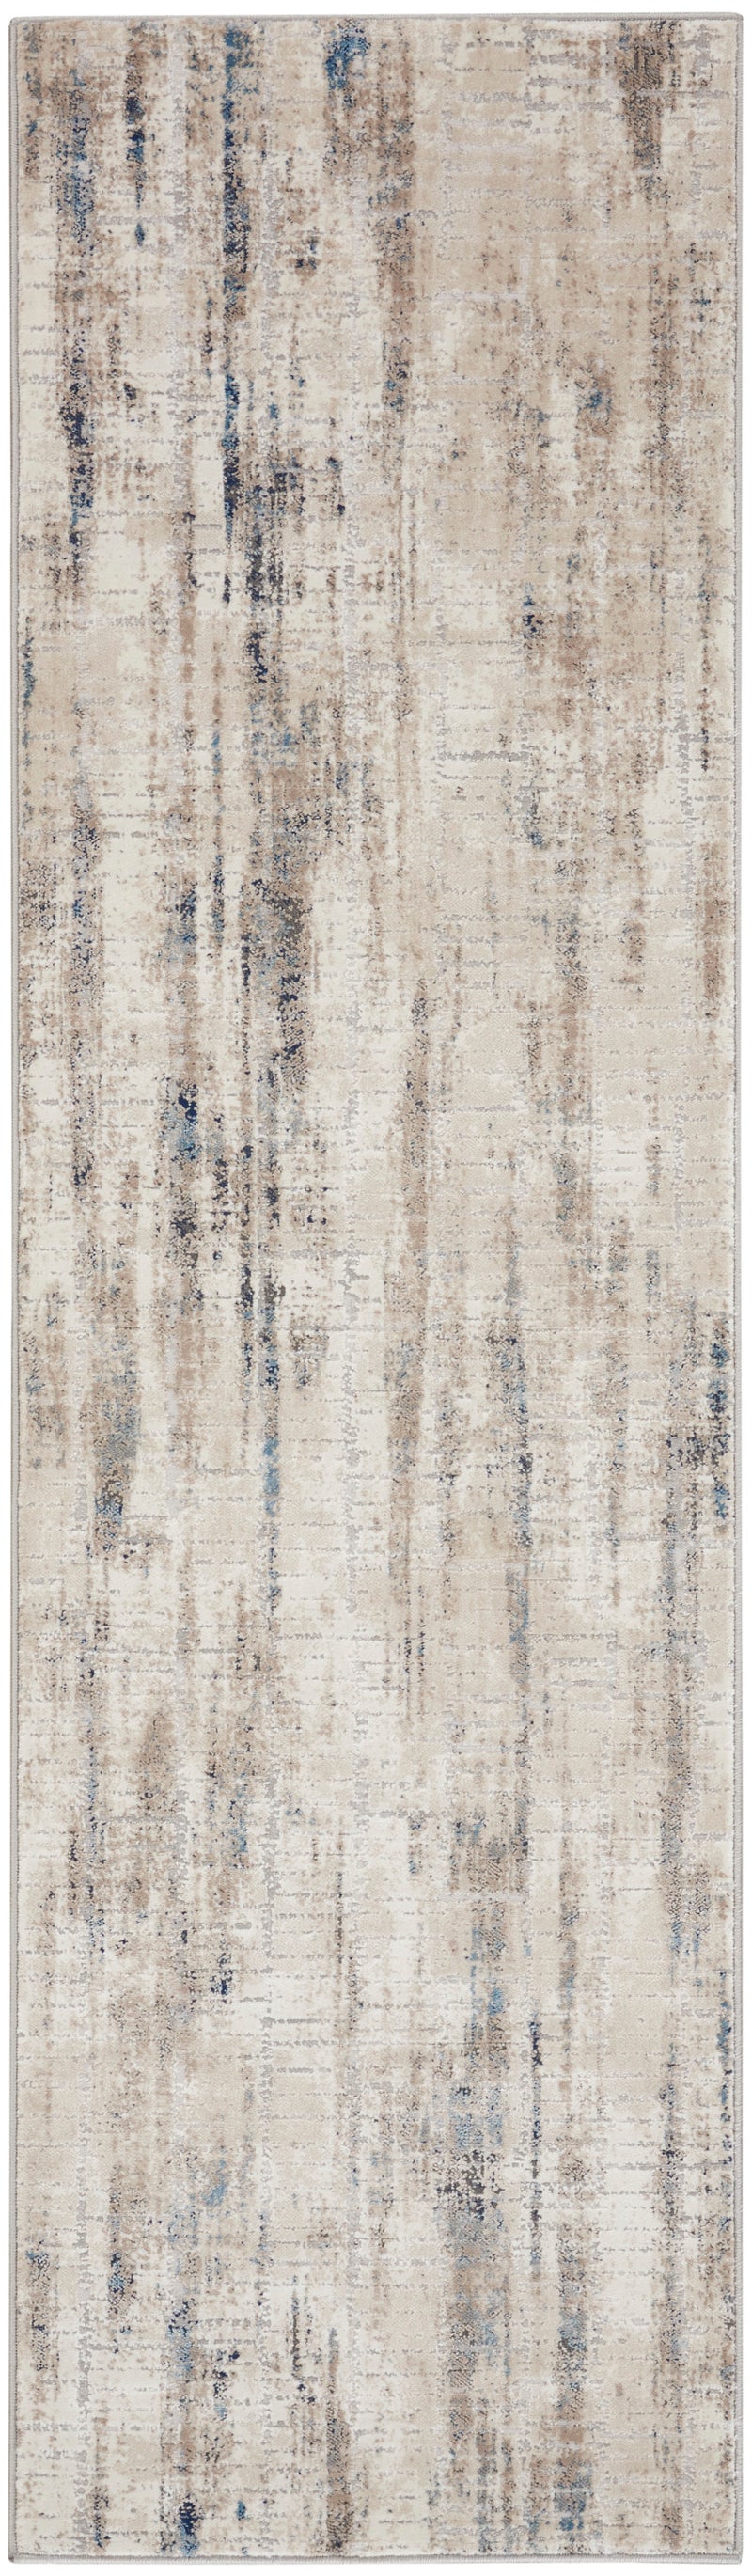 media image for ck022 infinity ivory grey blue rug by nourison 99446079107 redo 6 22